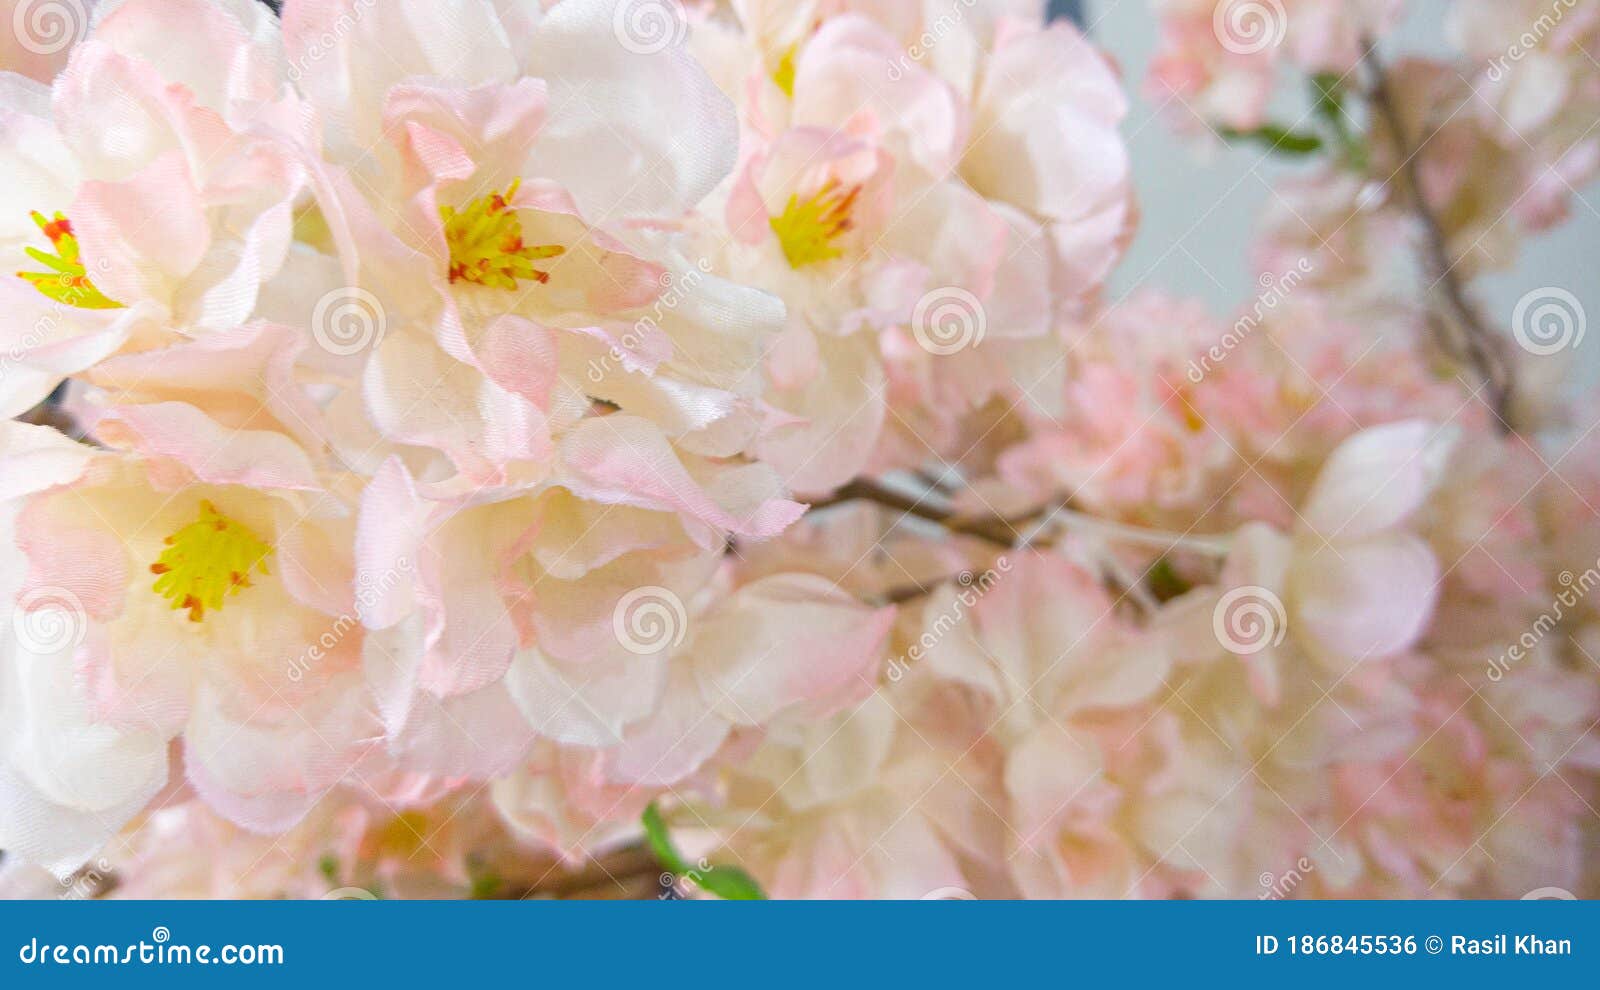 6,567 Wallpaper Rolls Stock Photos - Free & Royalty-Free Stock Photos from  Dreamstime